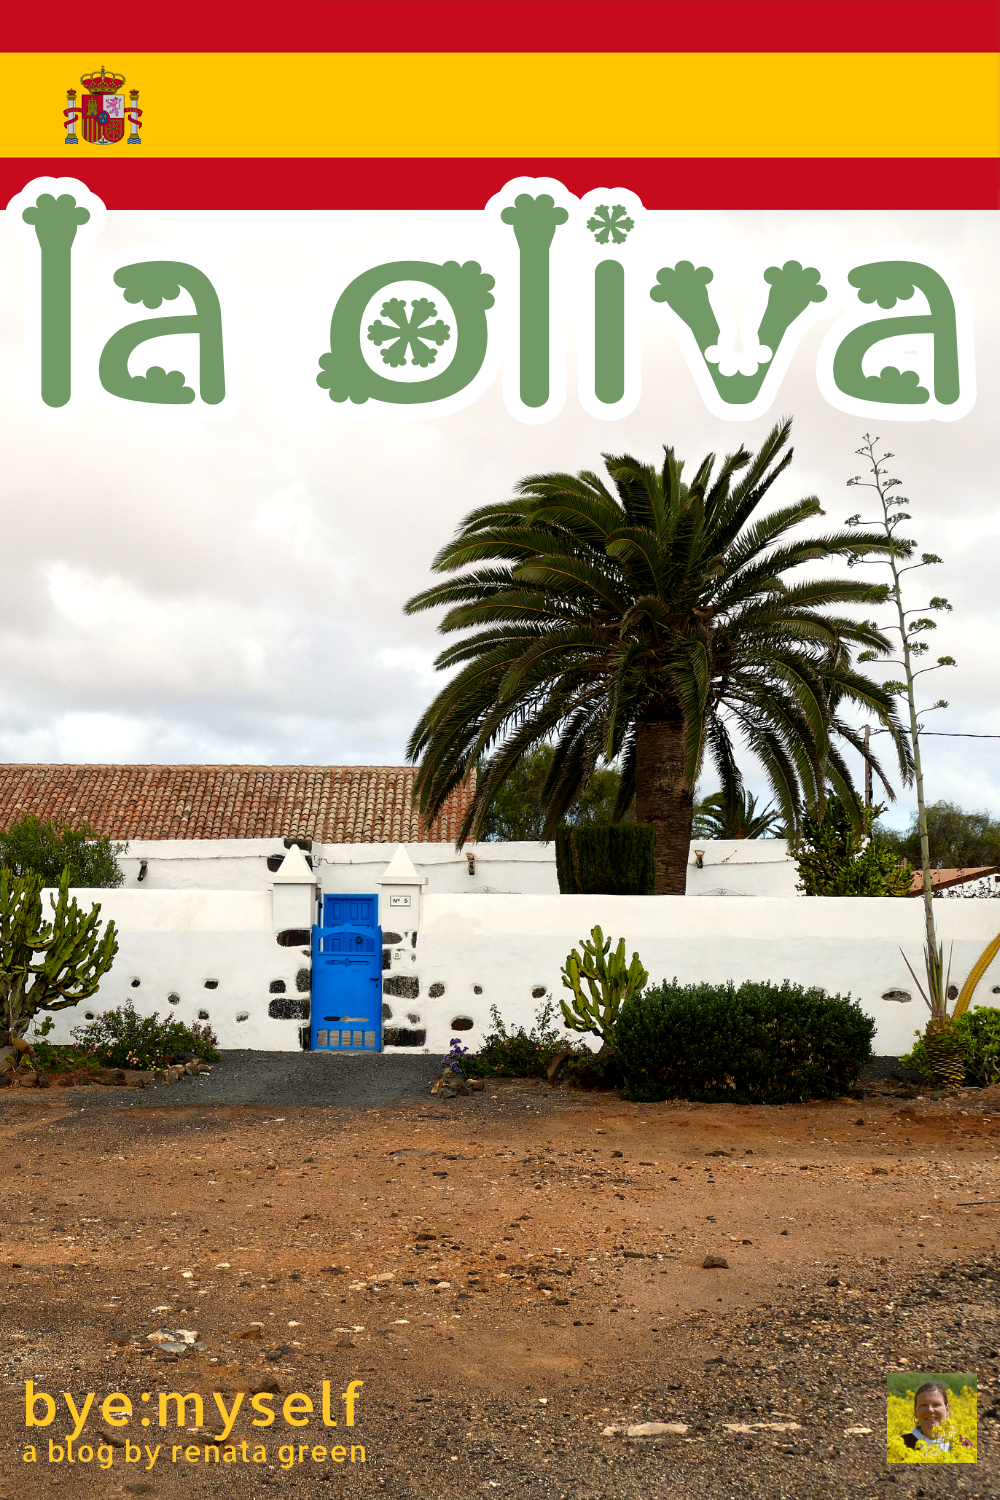 Pinnable Picture on the Post Guide to LA OLIVA